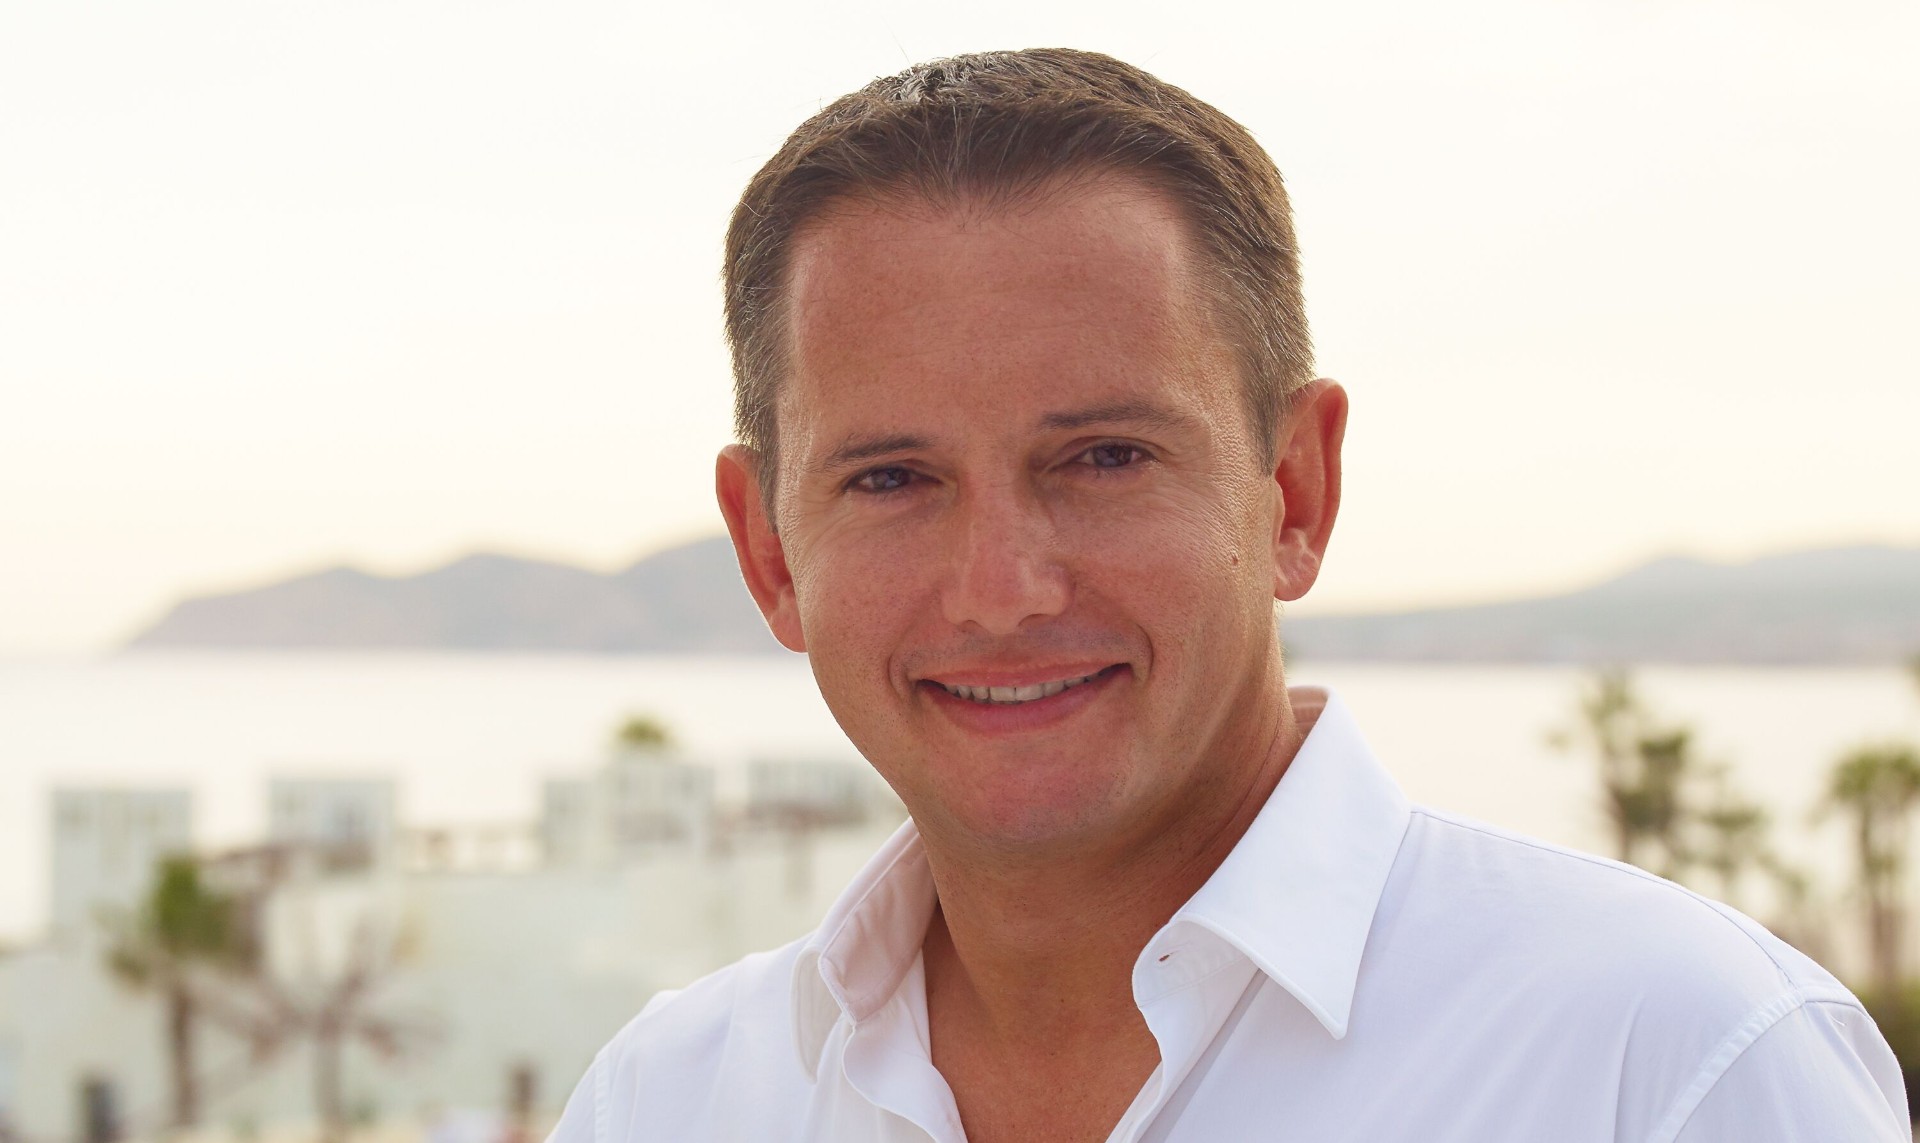 Frederic Vidal: The Regional Vice President and Managing Director of Los Cabos’ Most Luxurious Resort, Las Ventanas, Shares the Latest High-Tech Ways the Property Will Be Keeping Guests Safe